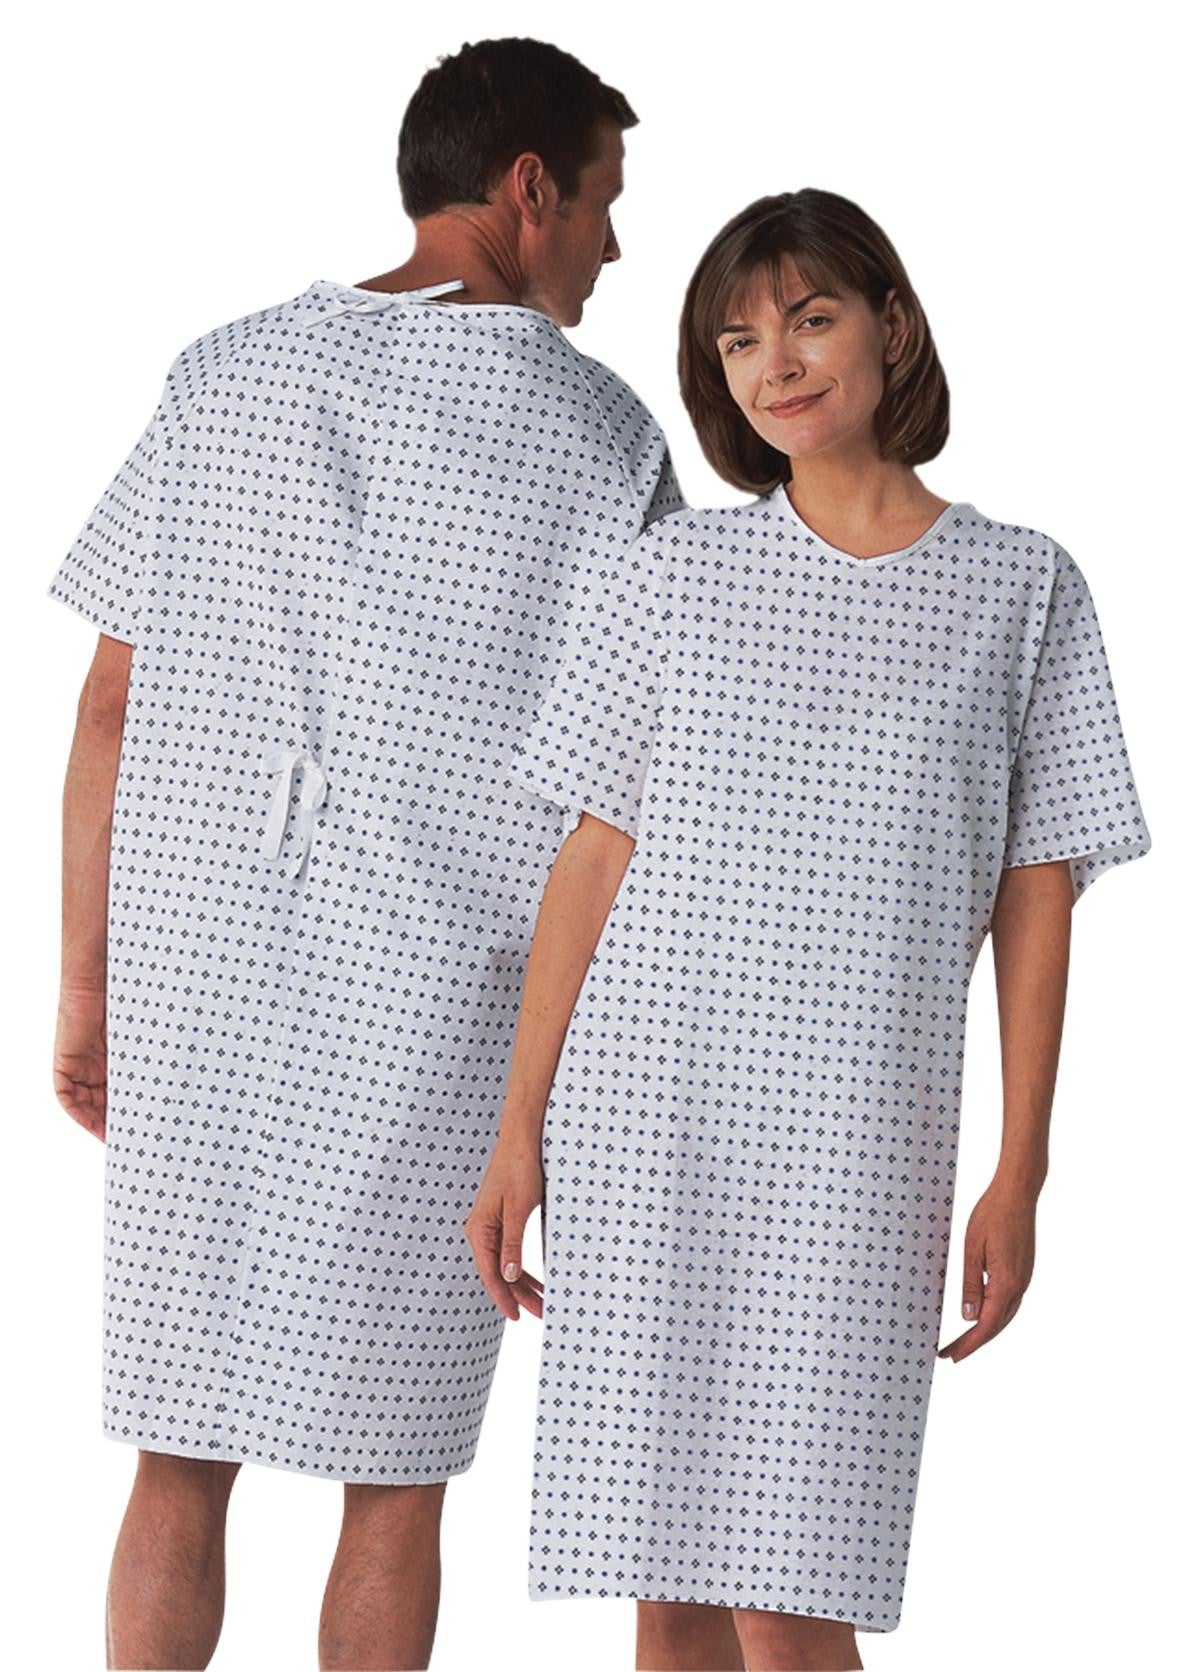 Silverts Sv26280 Adaptive Hospital Gowns Nursing Home & Home Care